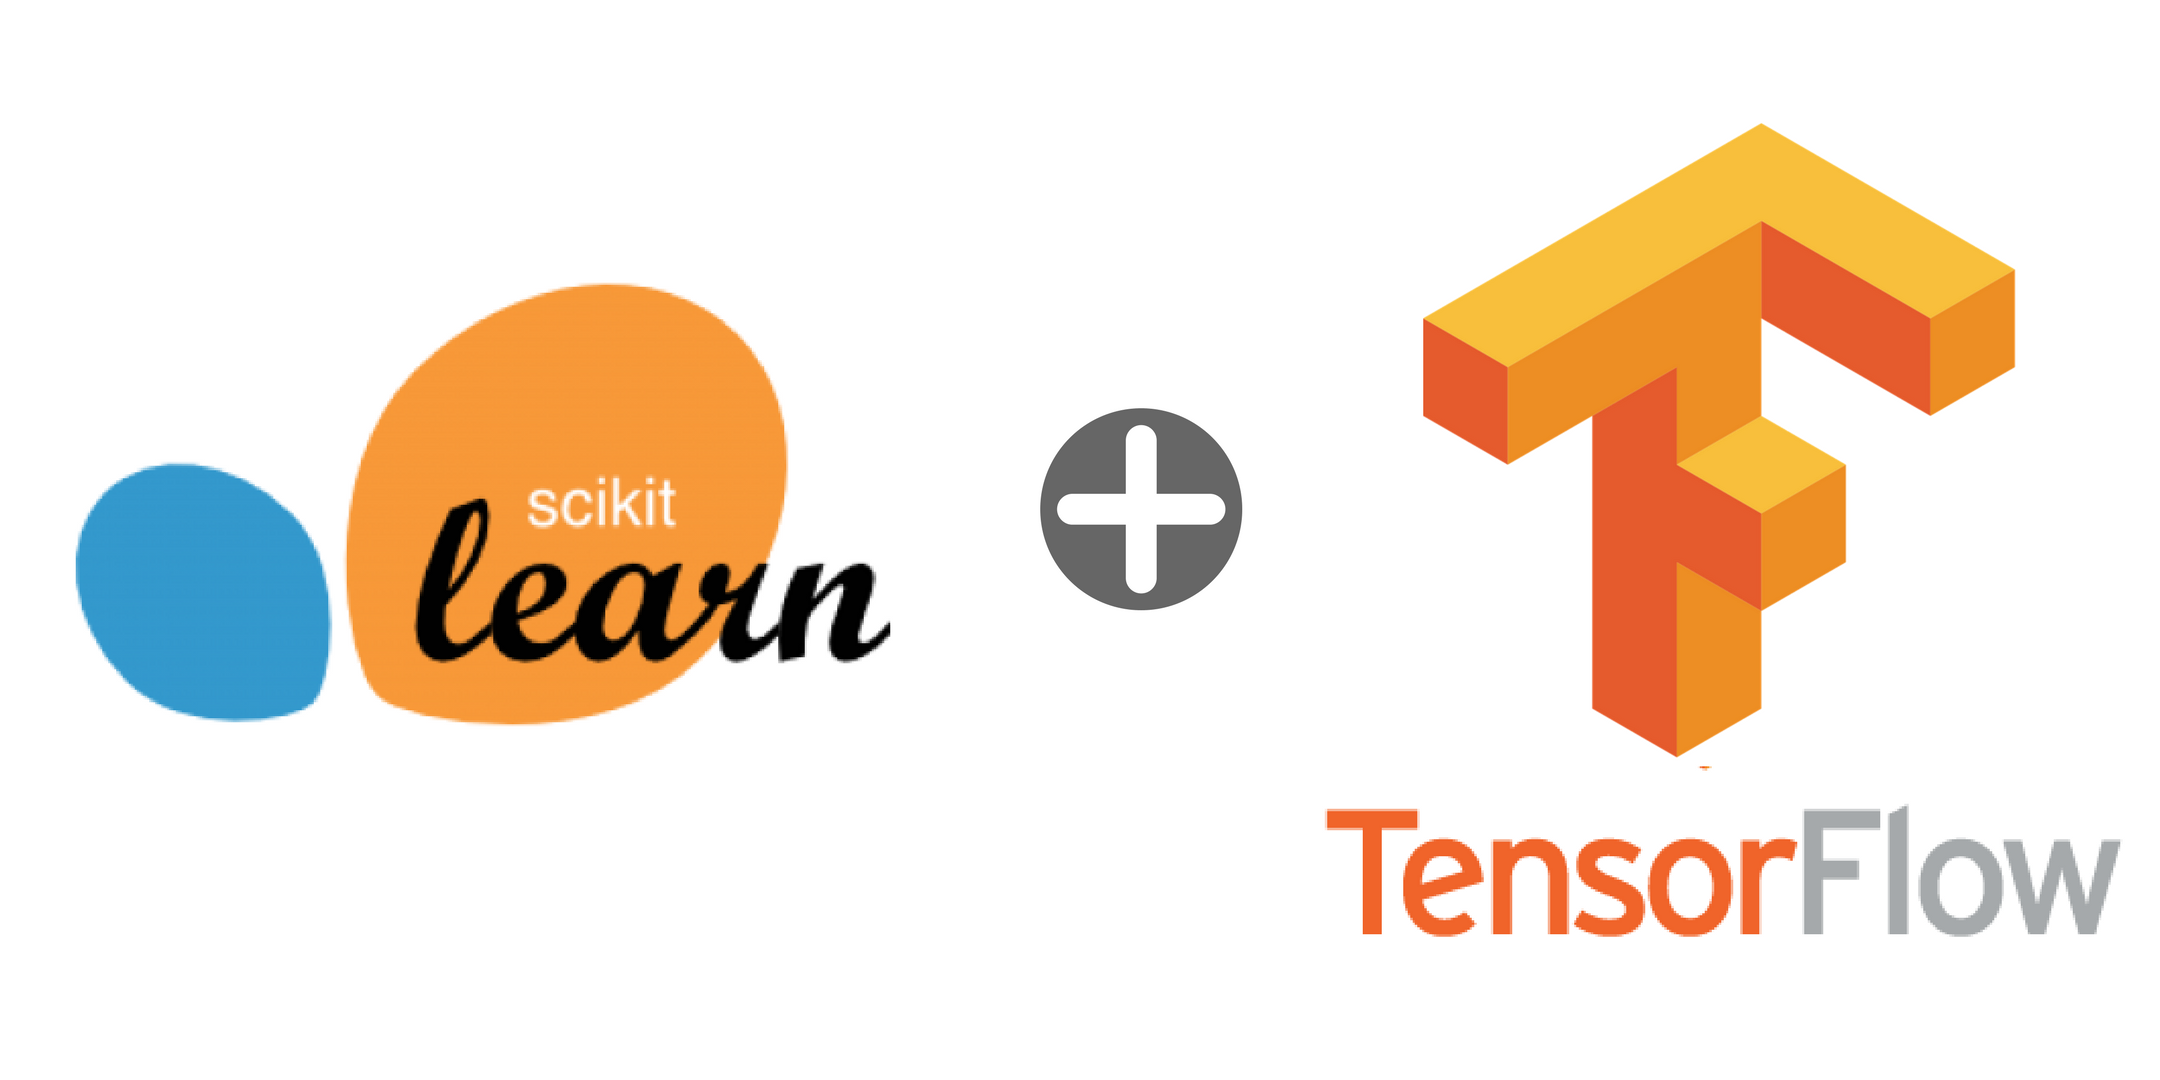 Difference between scikit-learn and 